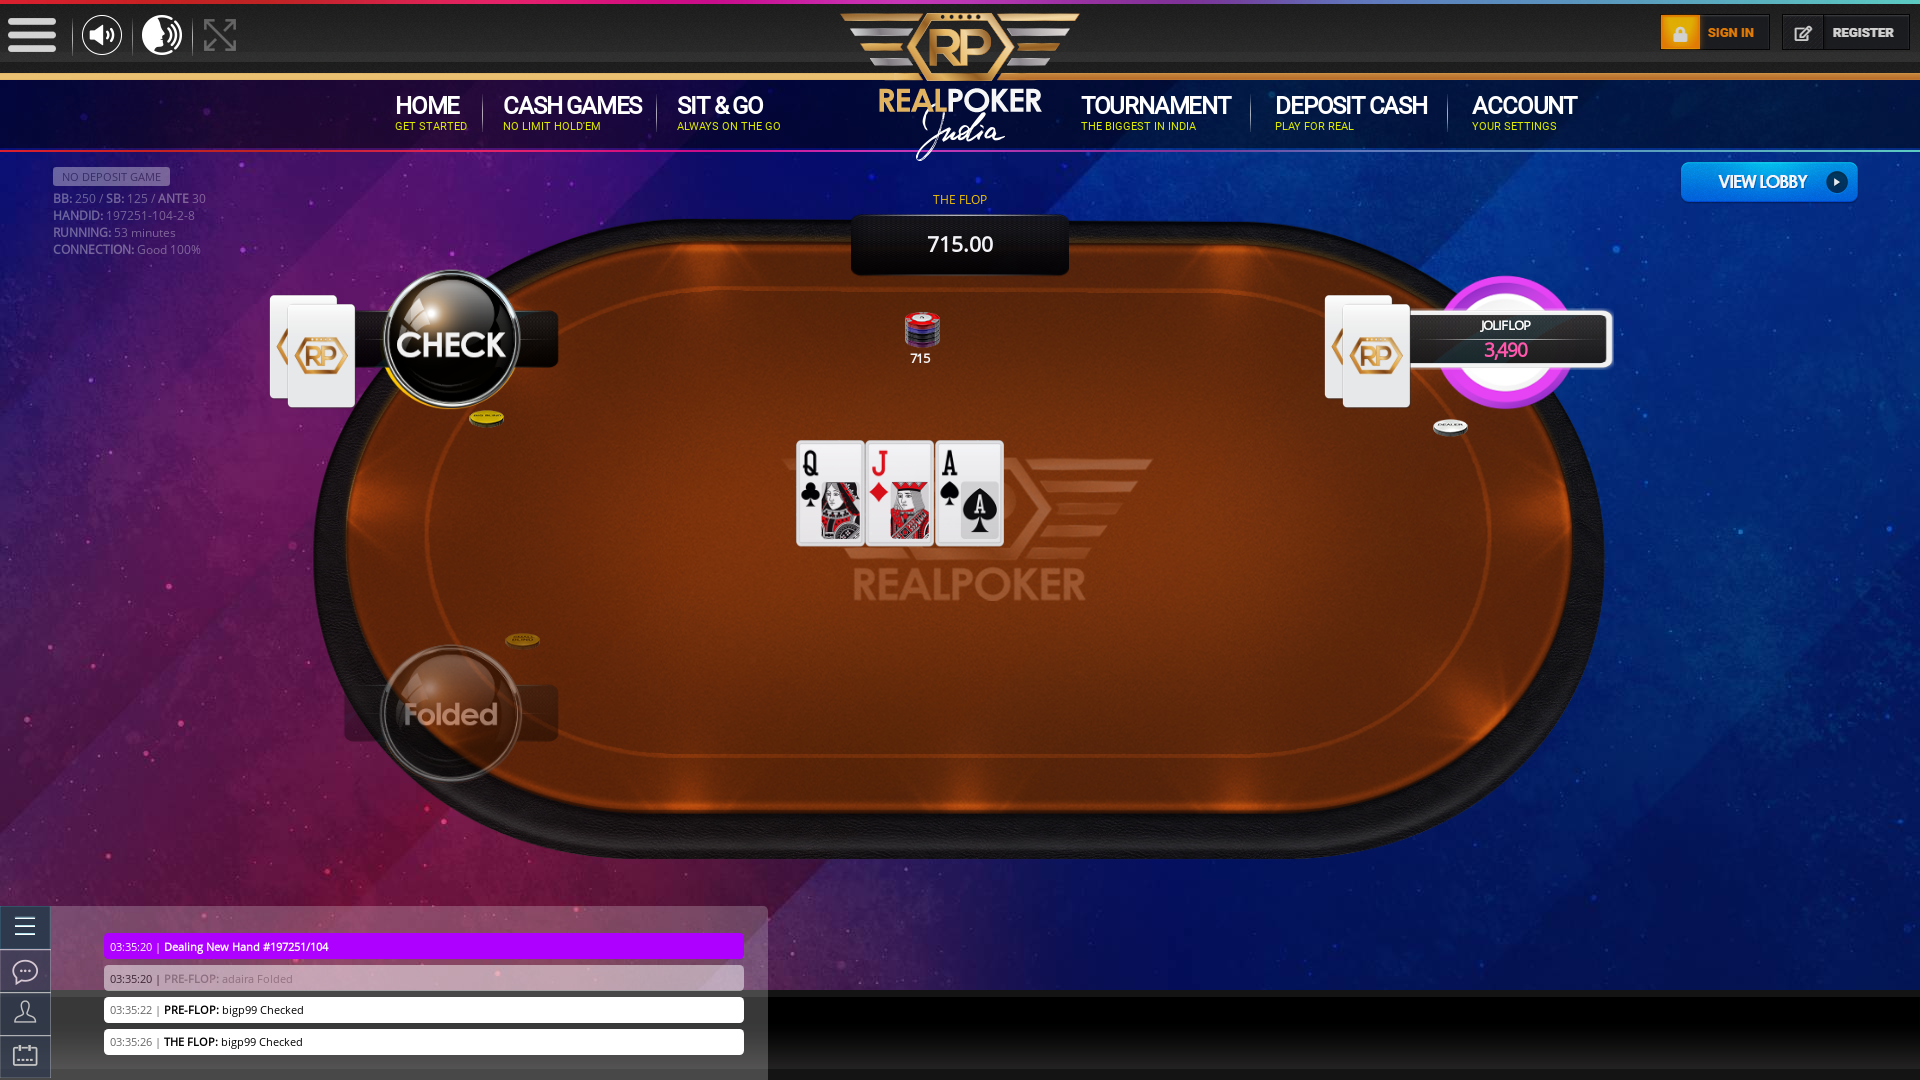 Indian online poker on a 10 player table in the 53rd minute match up